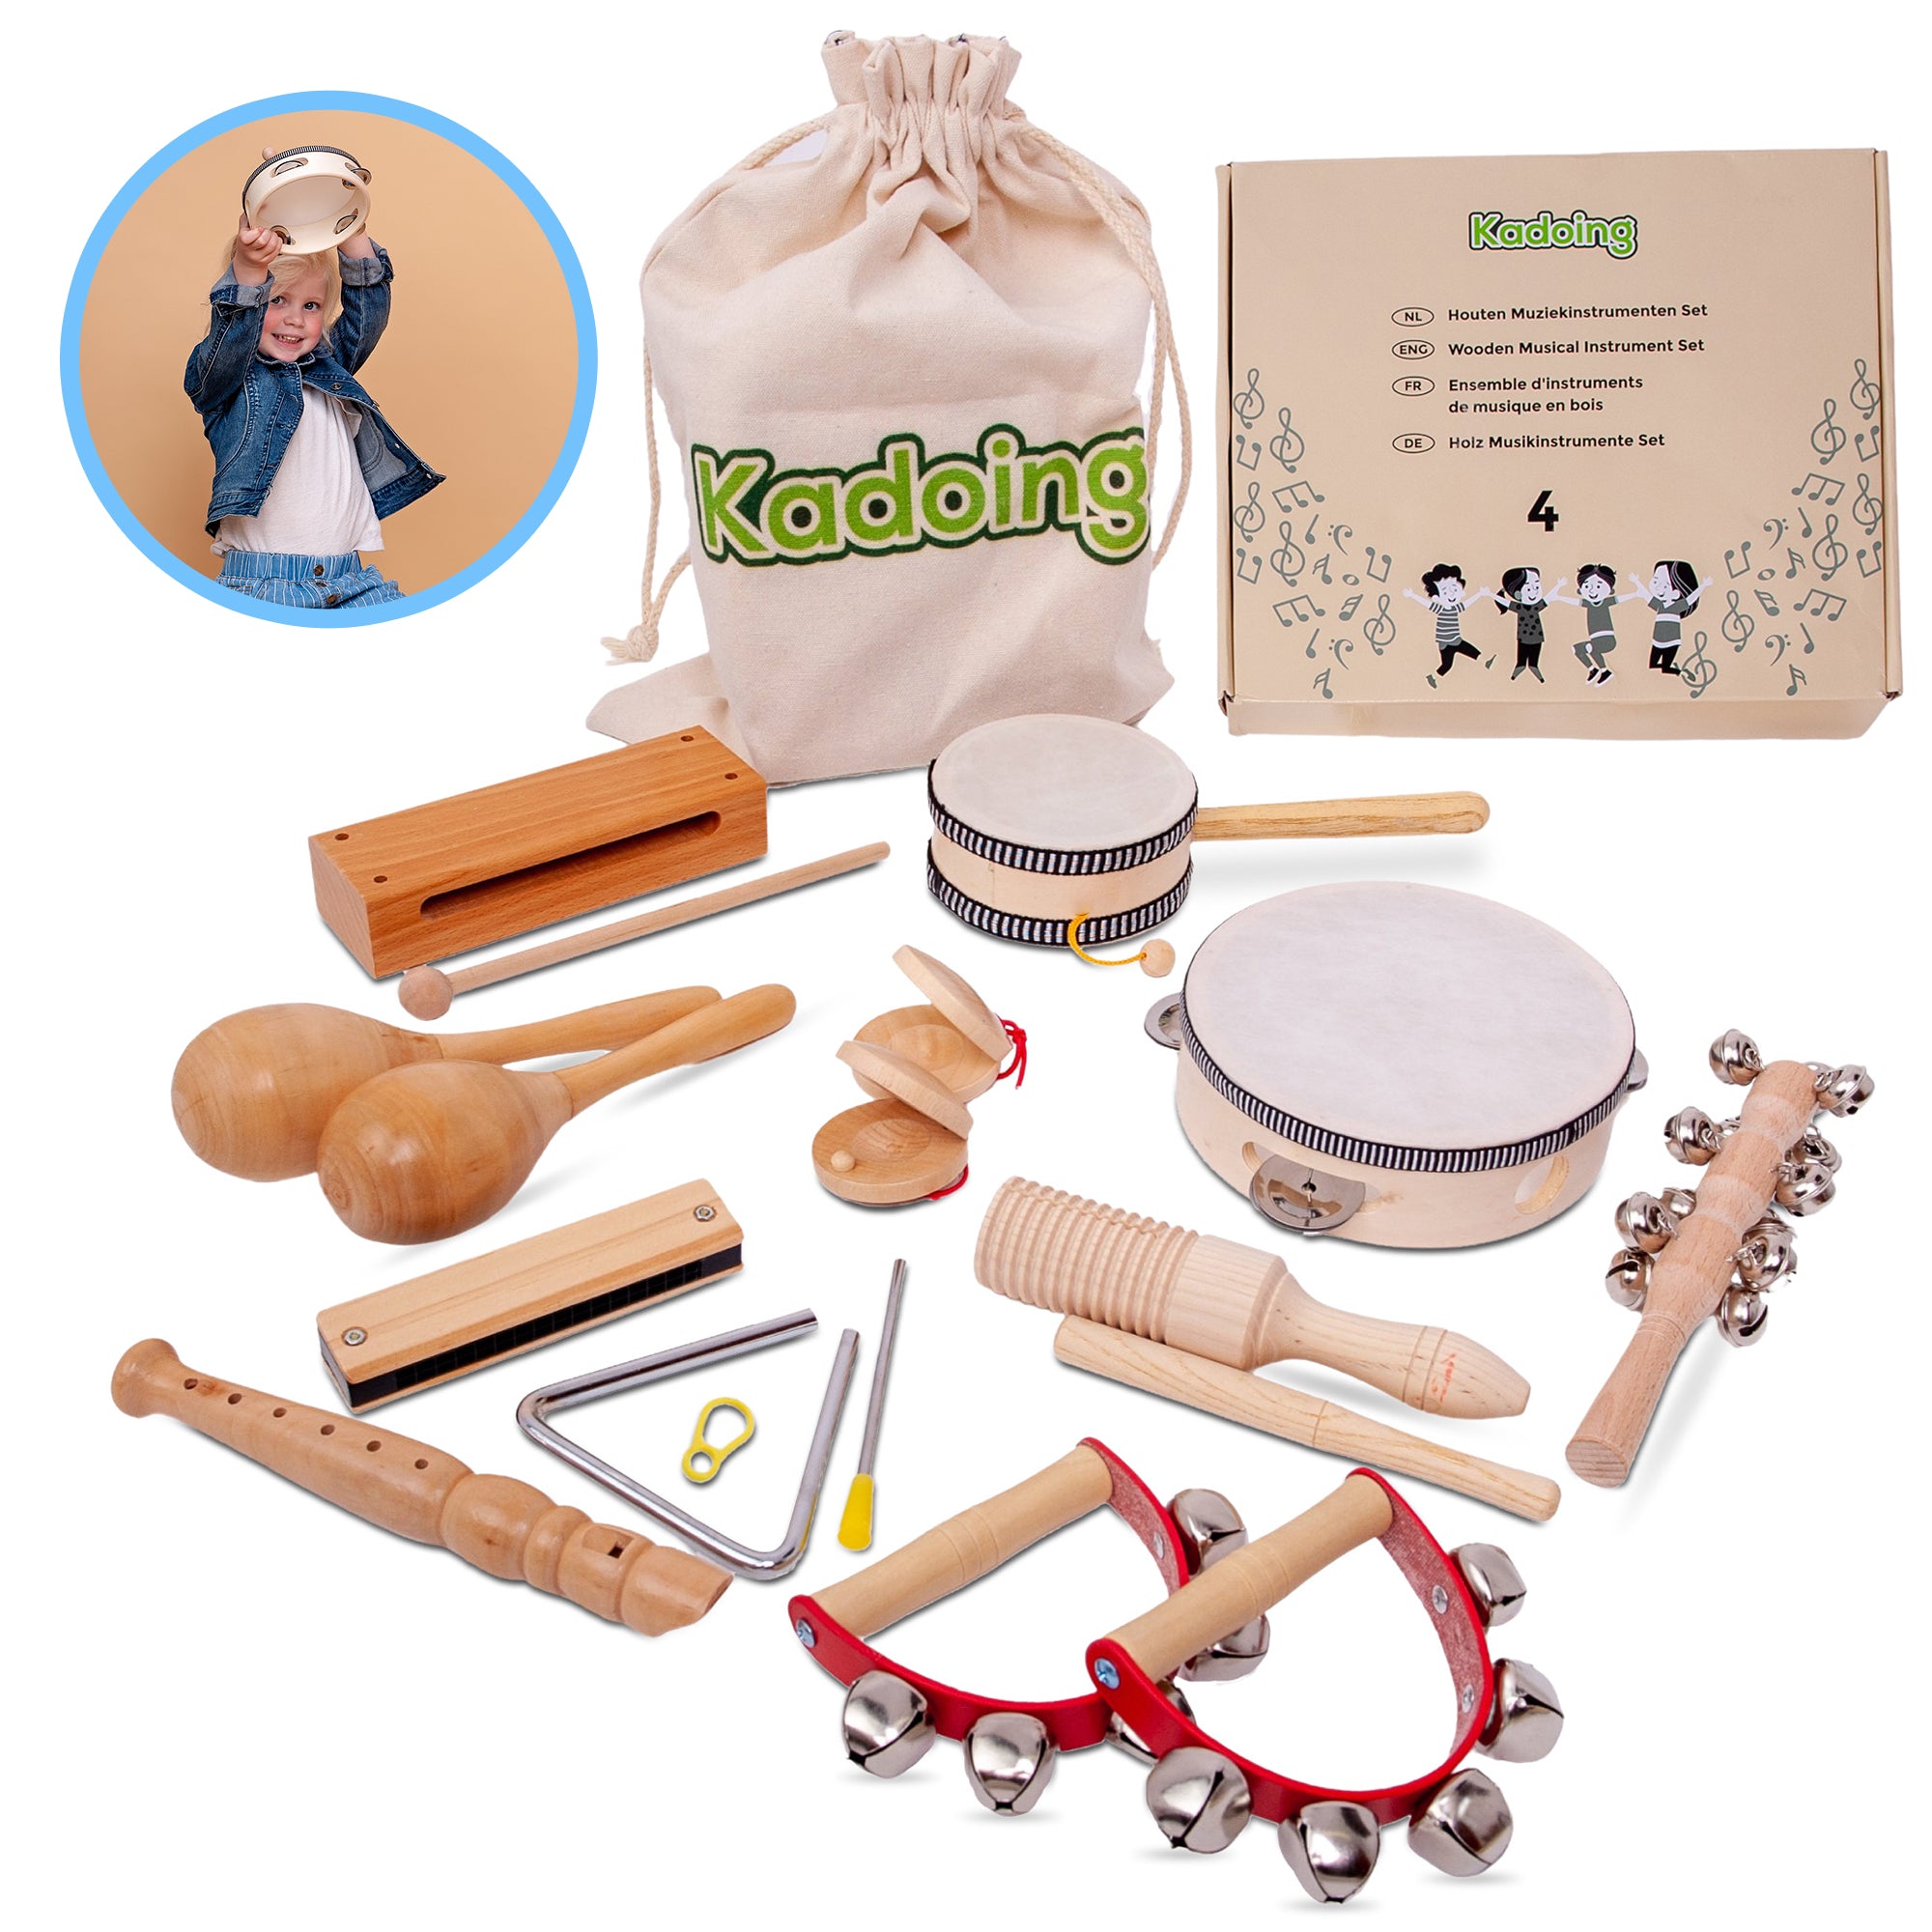 18-Piece Wooden Musical Instruments Set from Kadoing. The ultimate children's toy